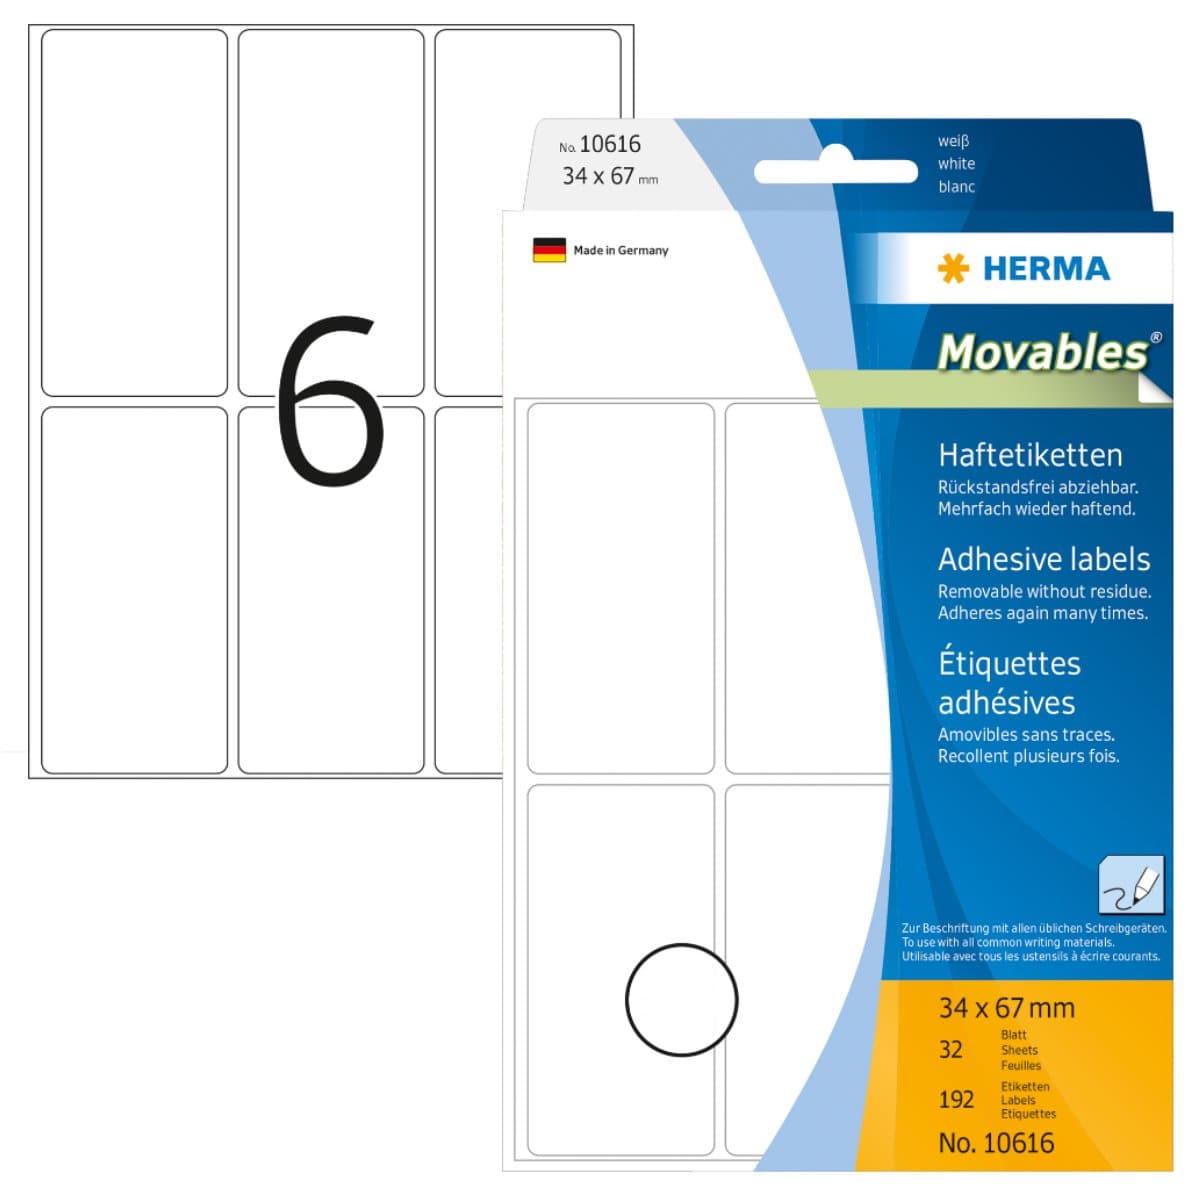 Herma Office Pack Movable Labels, 34 x 67 mm, 192/pack, White